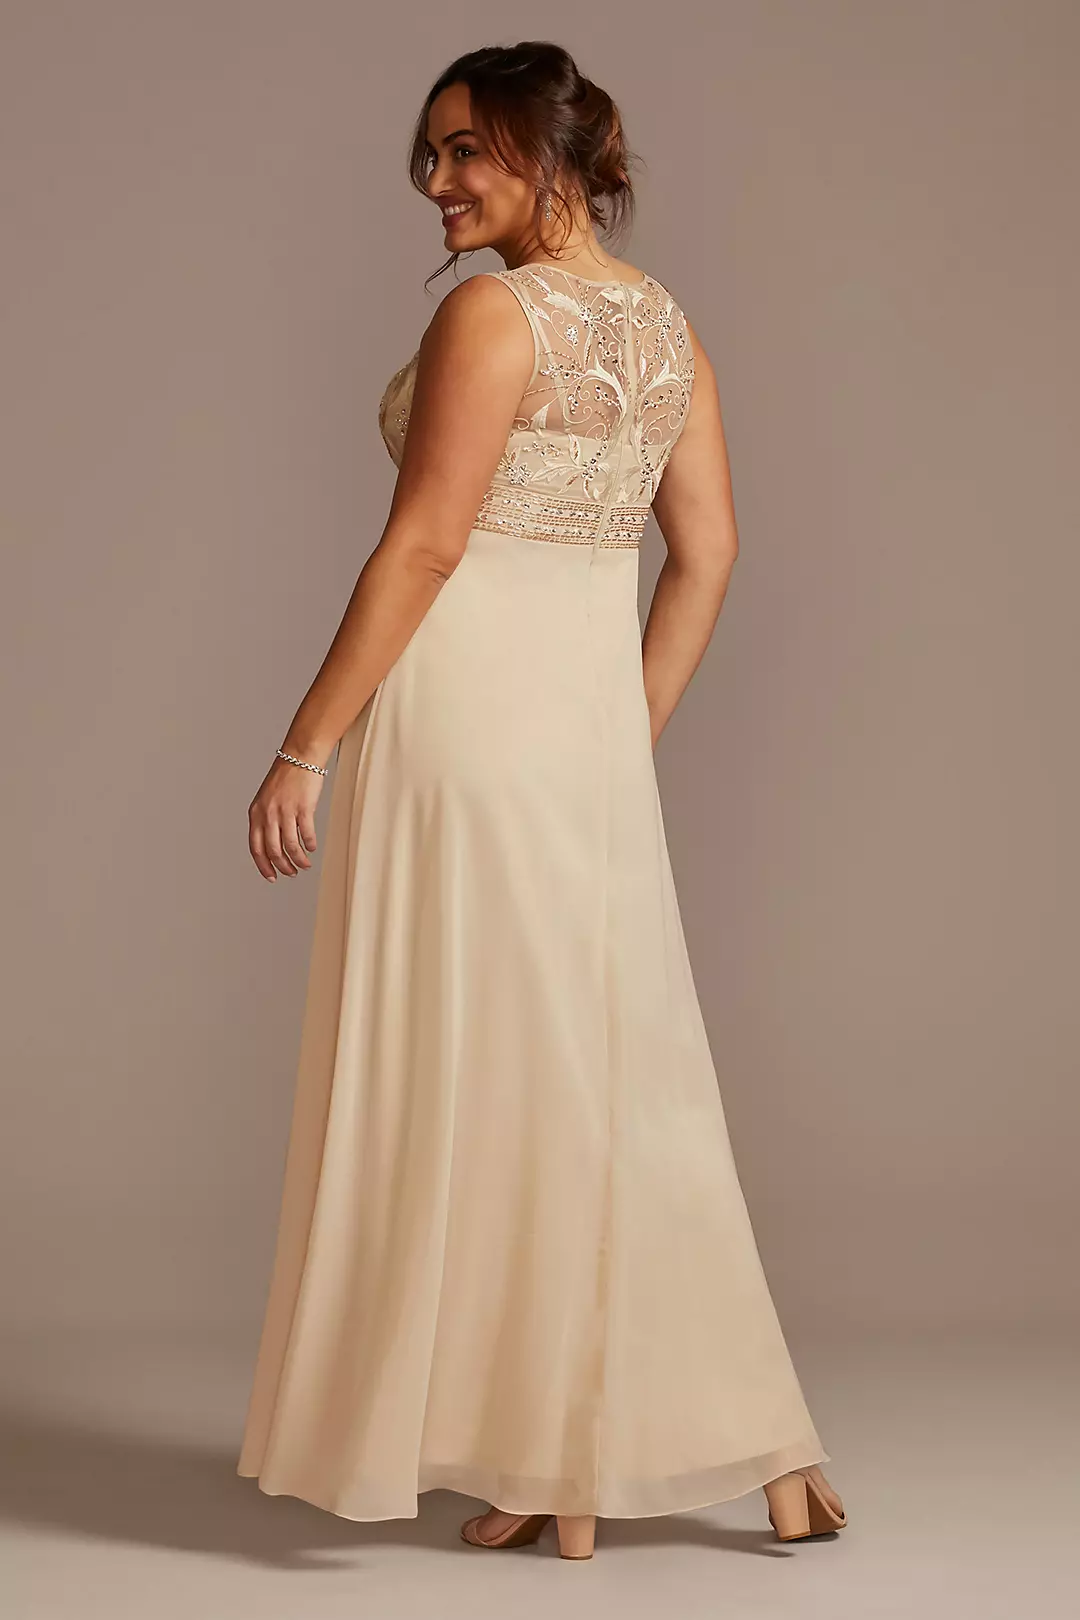 Embellished Illusion Bodice A-Line Plus Size Gown Image 2